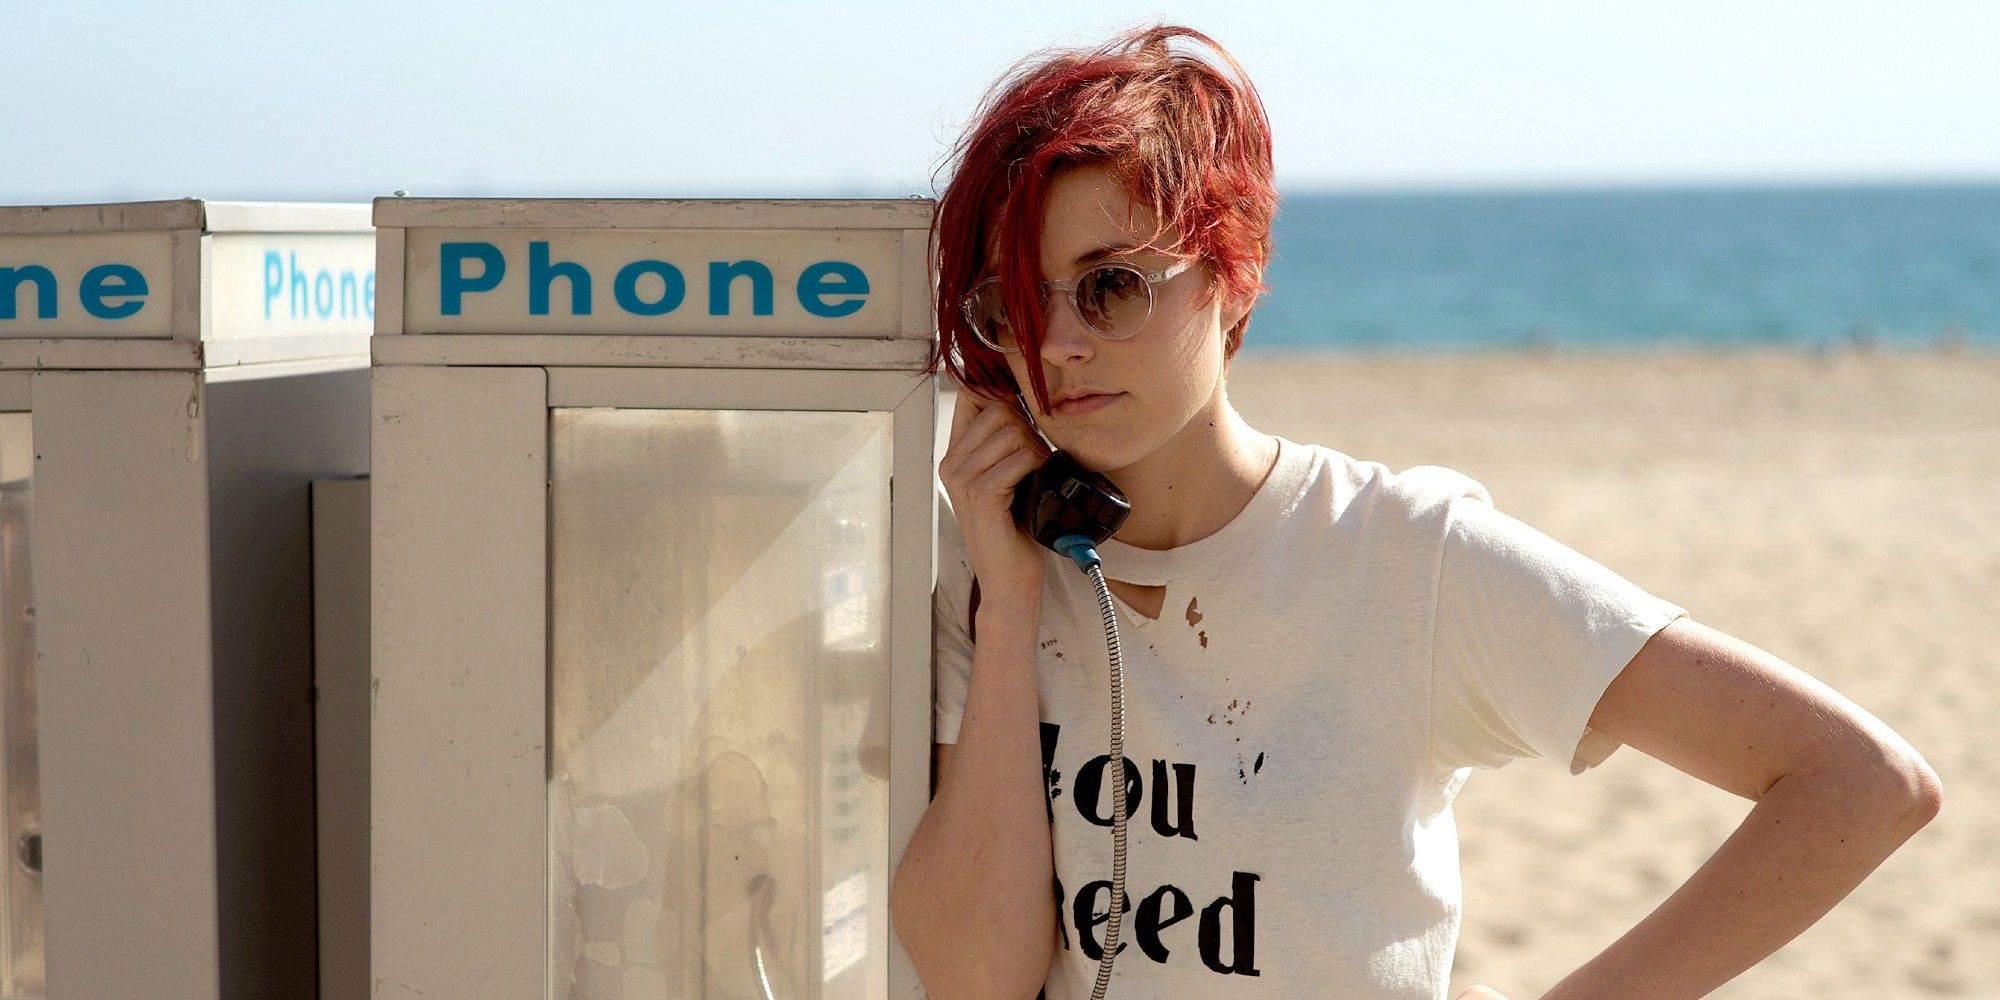 Greta Gerwig uses a phone booth in 20th Century Women